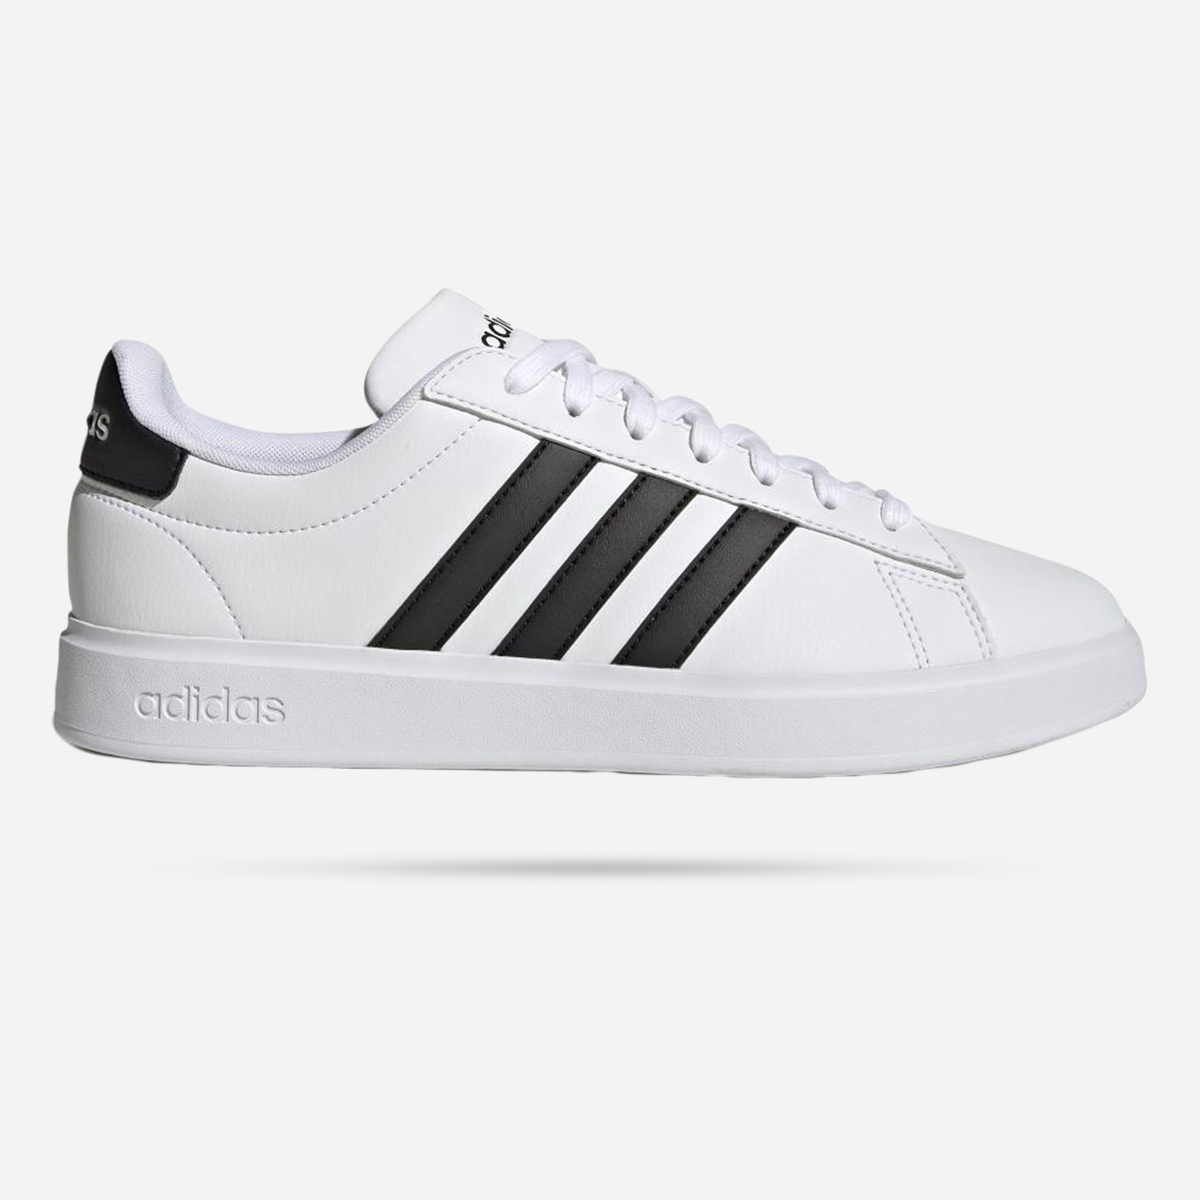 AN284431 Grand Court 2.0 Sneakers